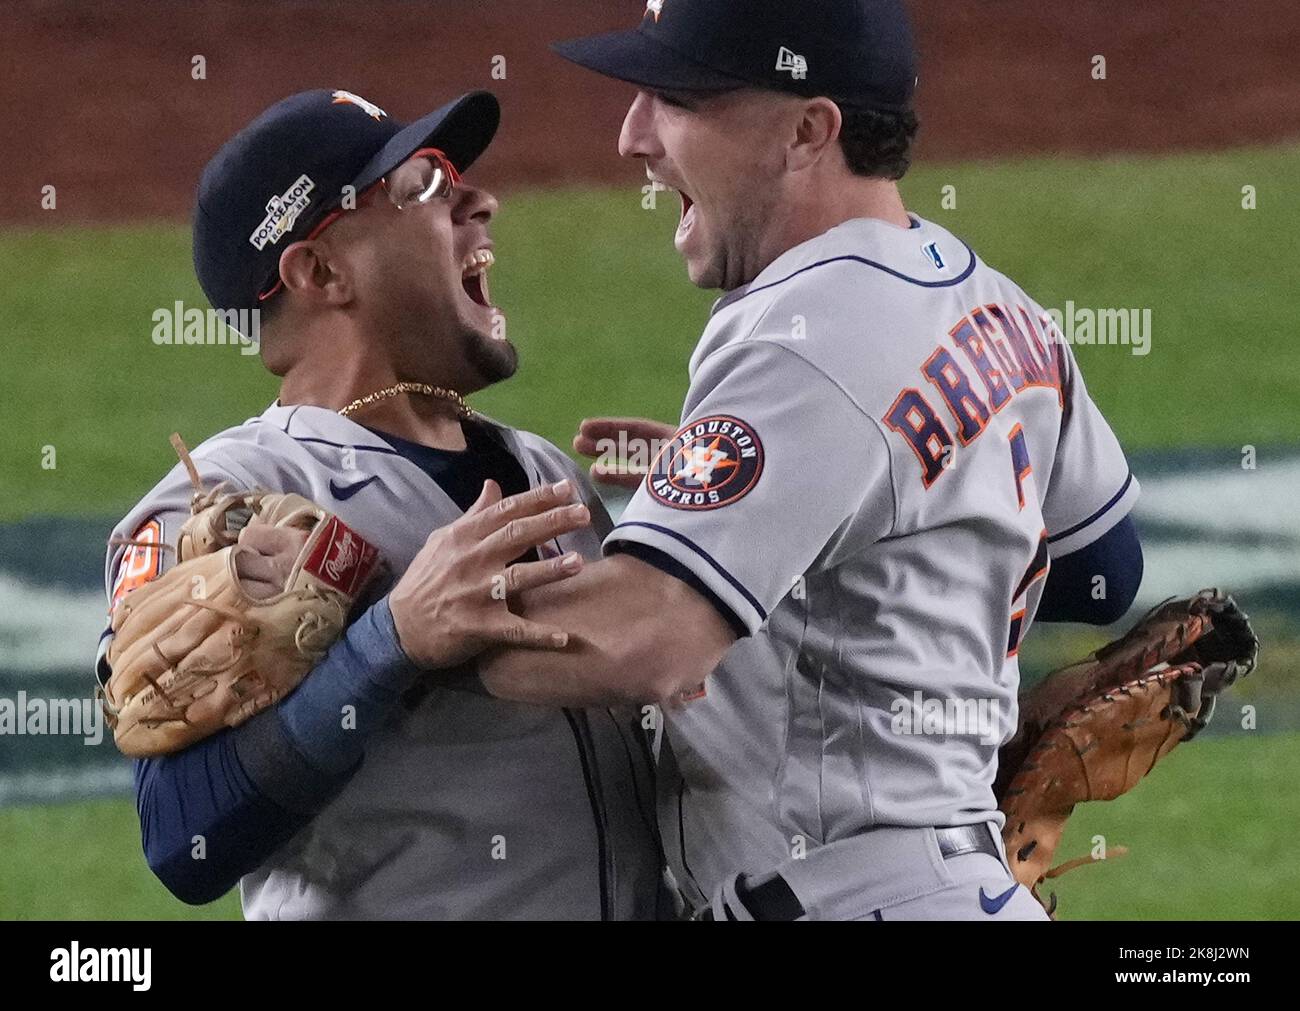 New York, United States. 24th Oct, 2022. Houston Astros Yuli Gurriel and  Alex Bregman celebrate after the Astros beat the New York Yankees 6-5 in  game four of their American League Championship